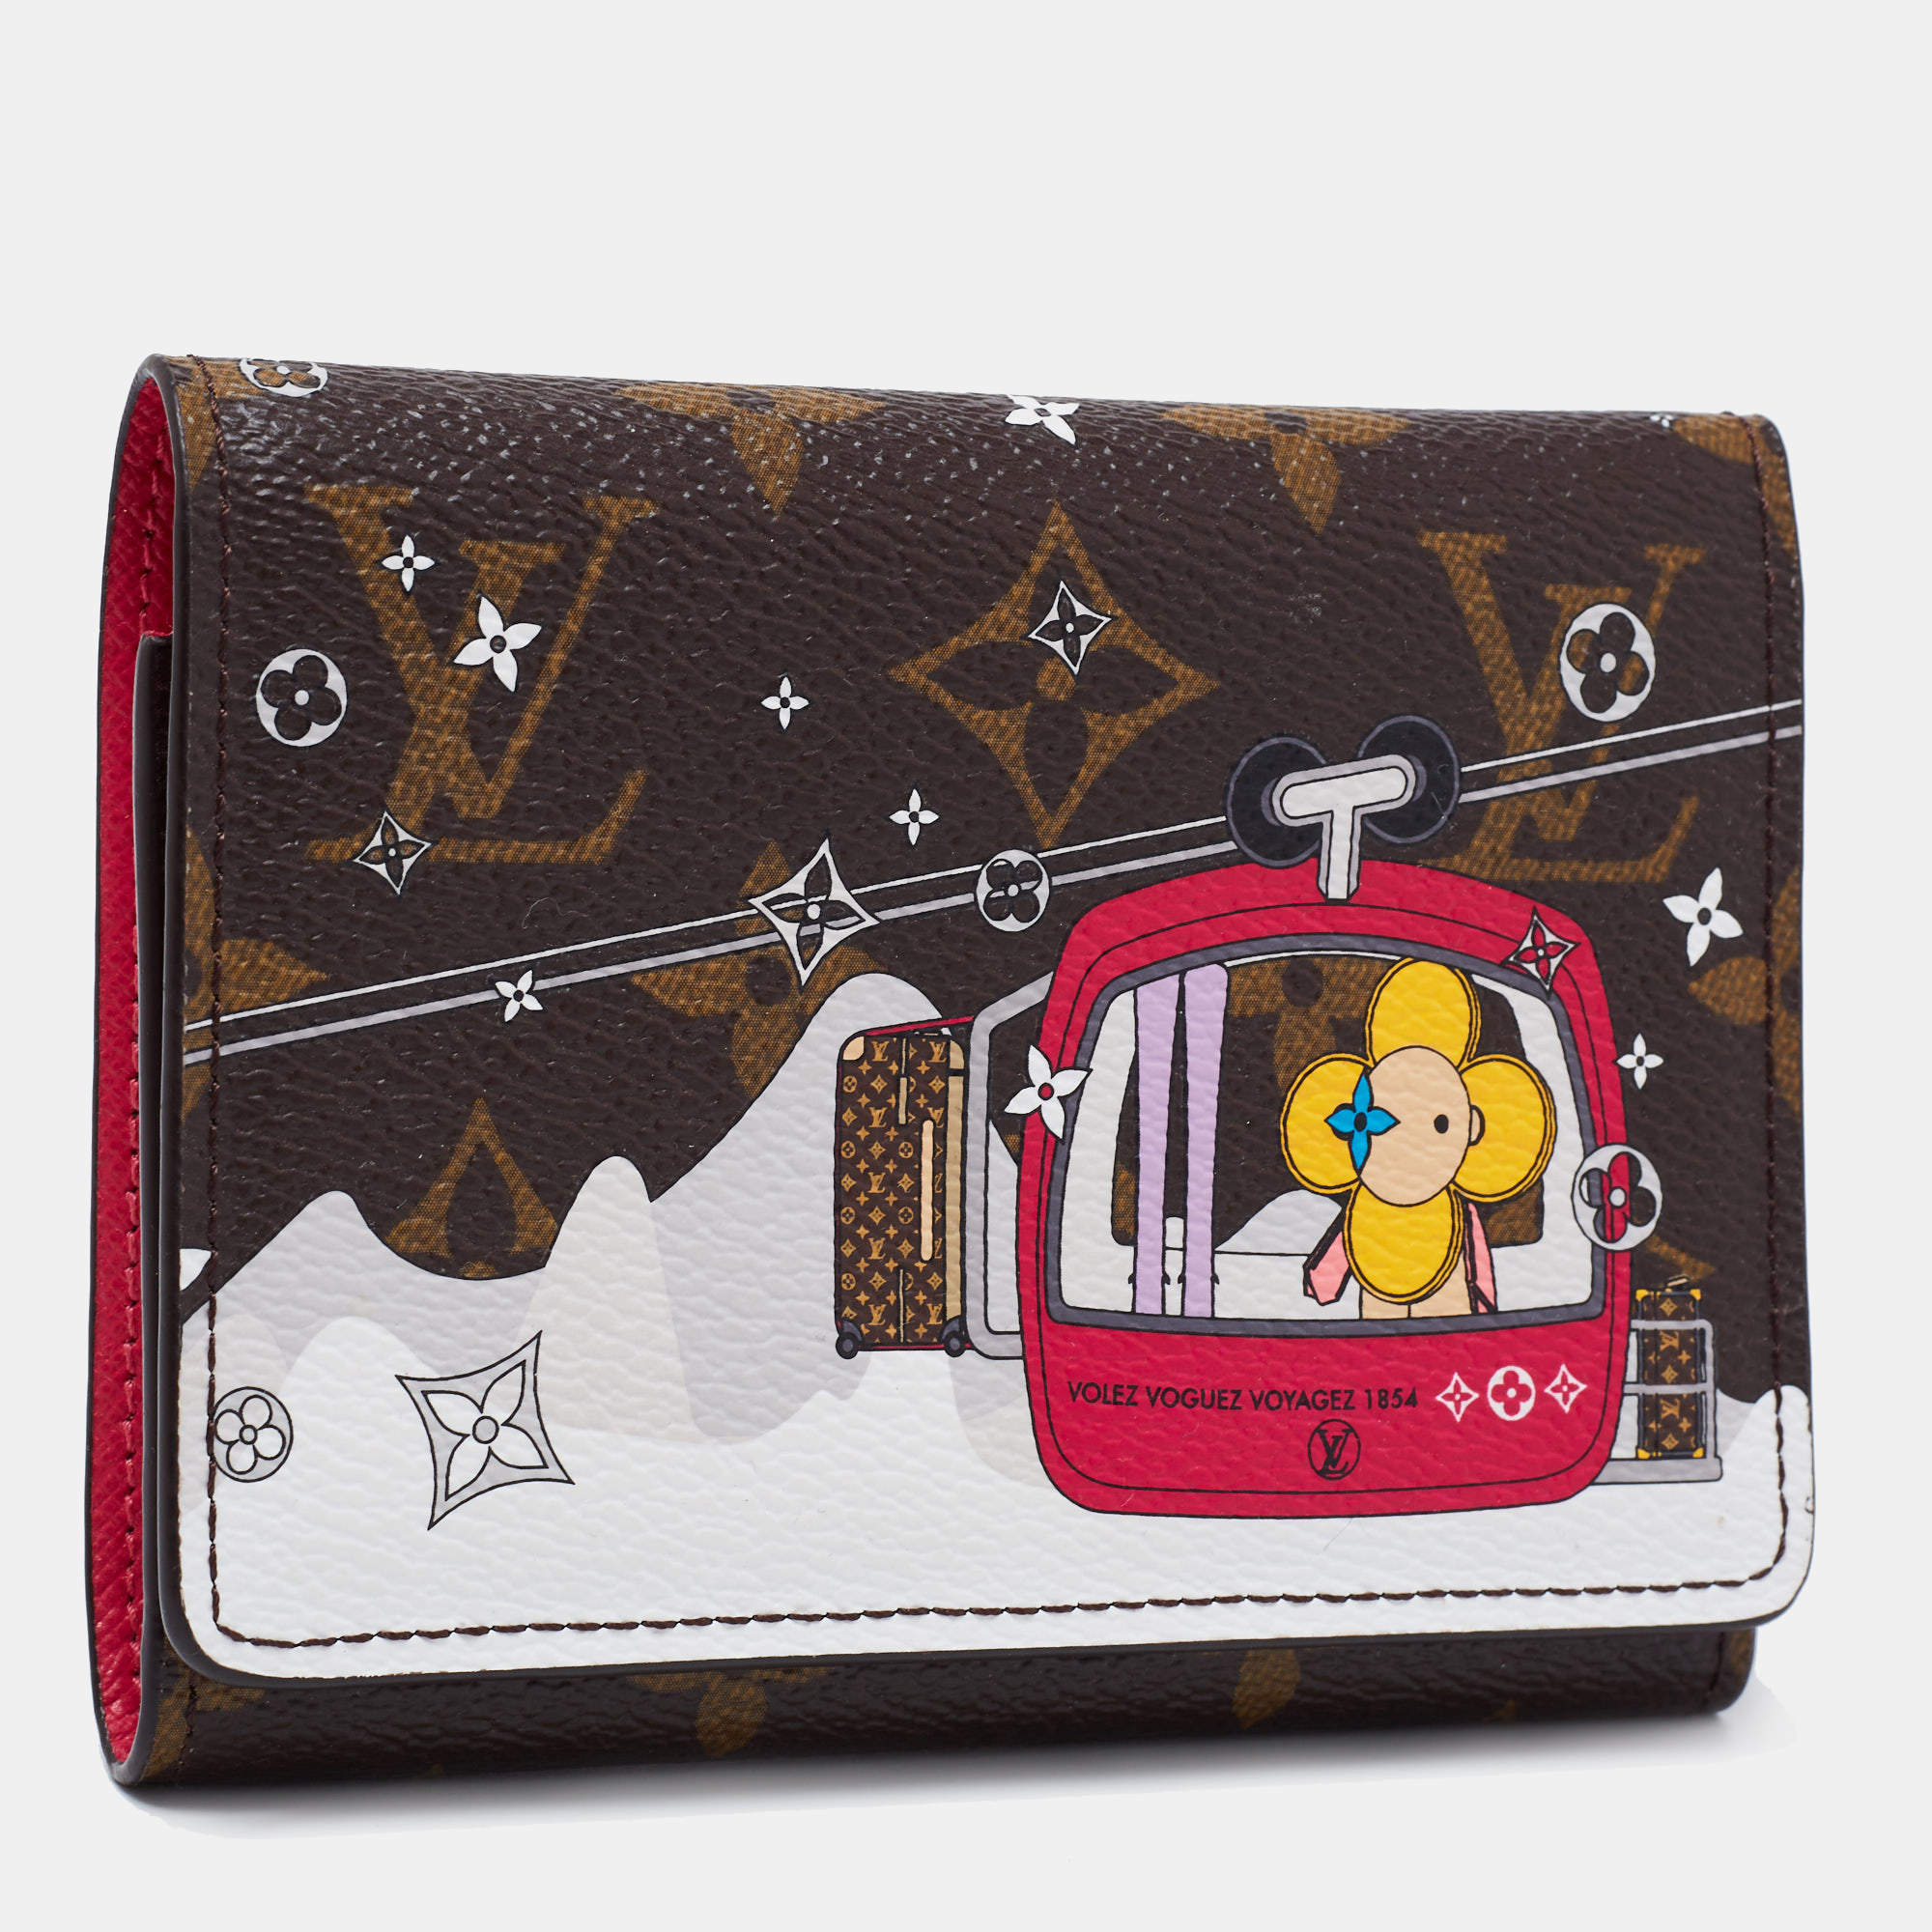 Lv Sarah Wallet Price Malaysia Limited